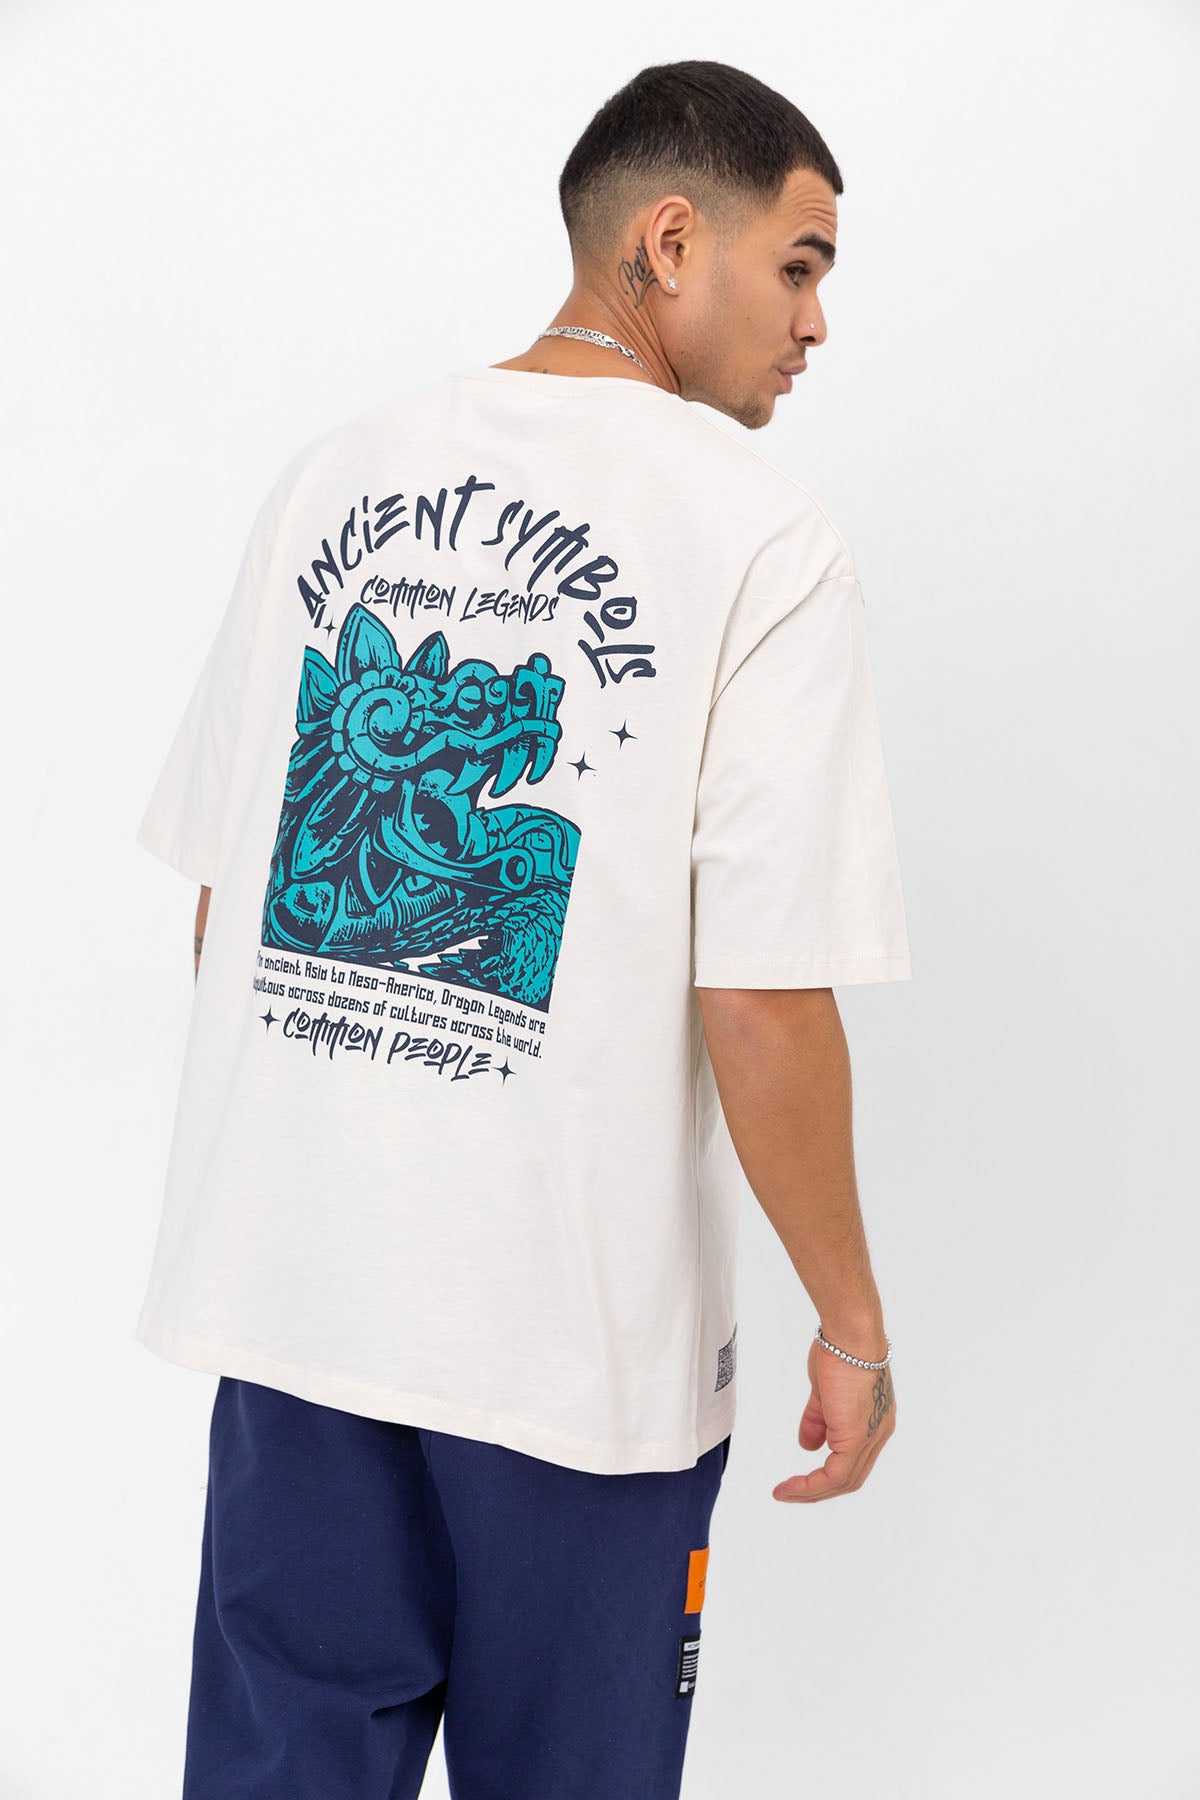 Tryk ned momentum Jonglere Ancient Off-White Oversized T-shirt – Common People